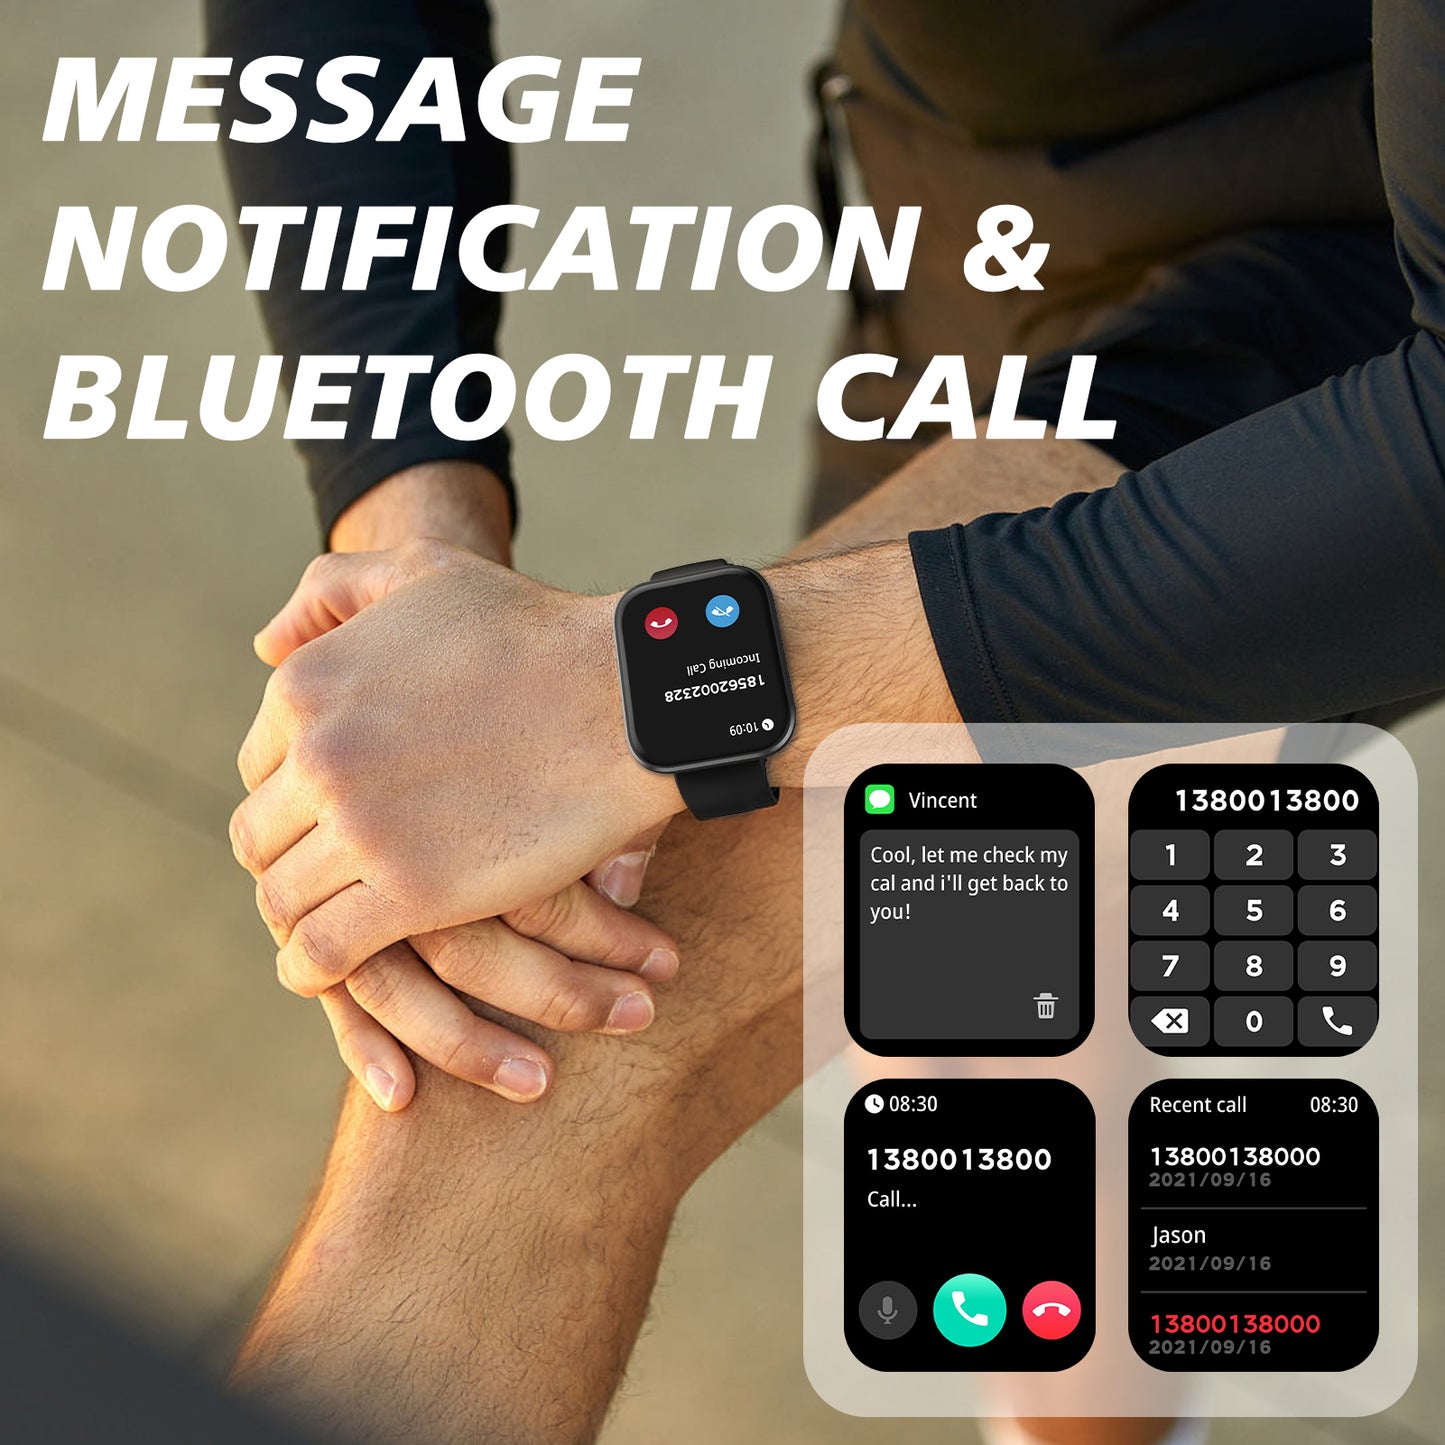 ANCwear S7--1.96" Display/Answer&make call/ Ai assistant/Heart Rate Sleep Monitor/120+ Sports Modes